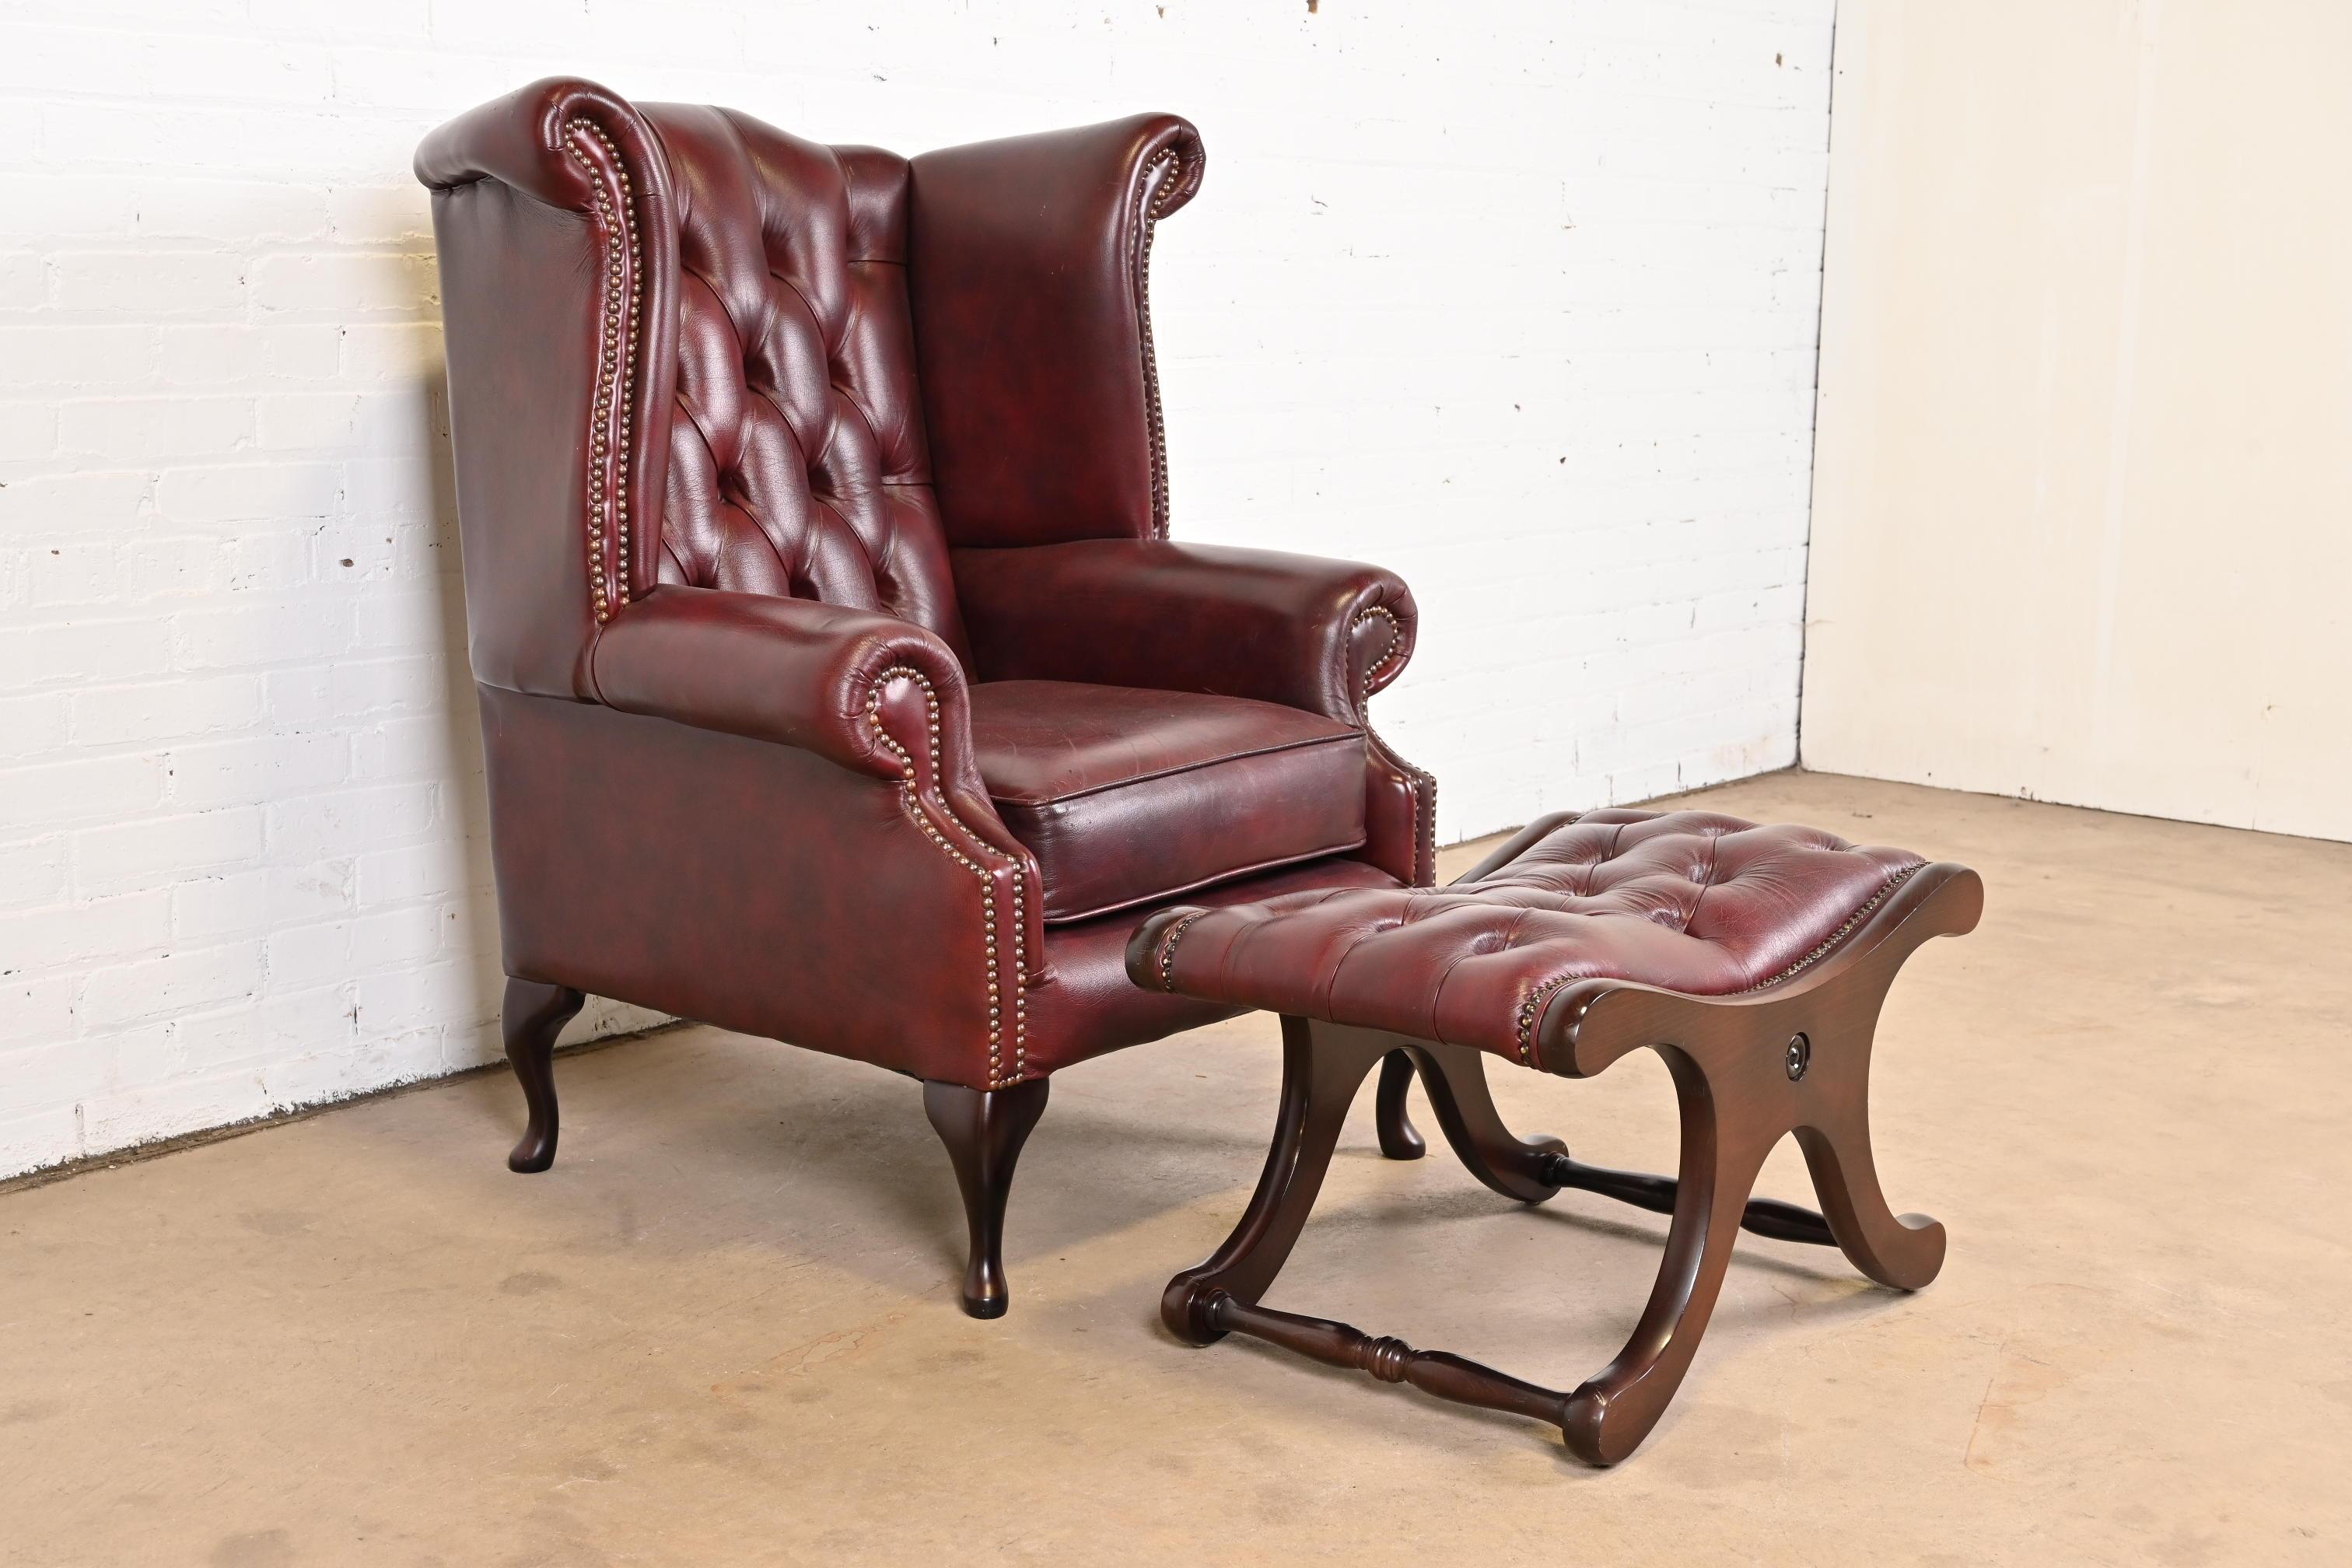 Vintage English Oxblood Leather Chesterfield Wingback Lounge Chair with Ottoman 2